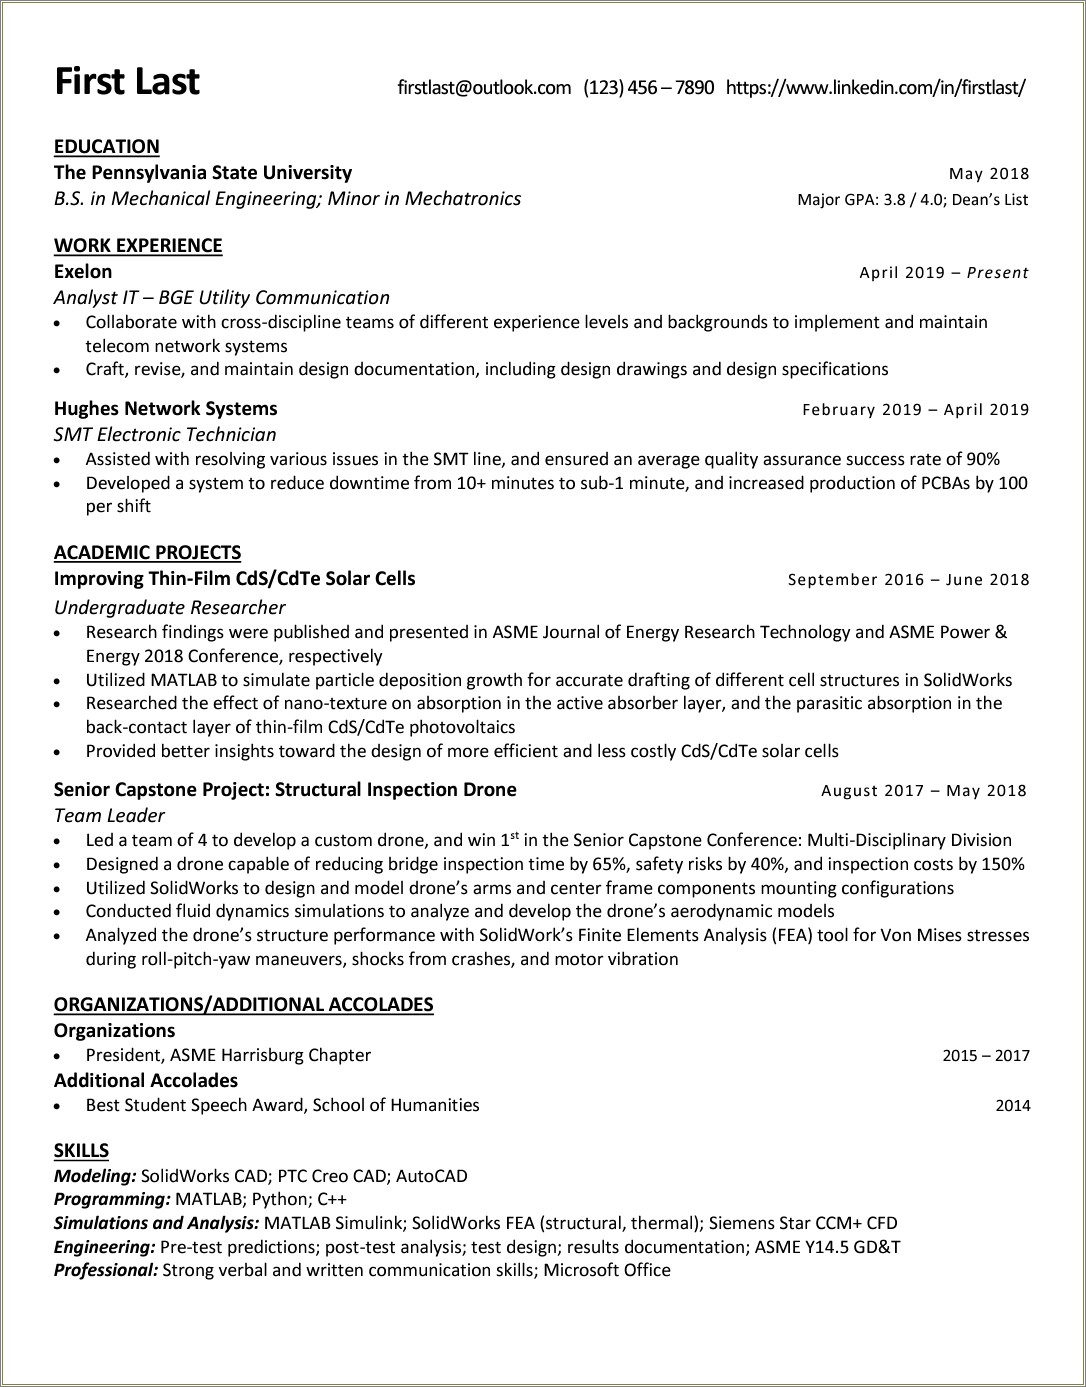 Authorized To Work In The Us Resume Reddit